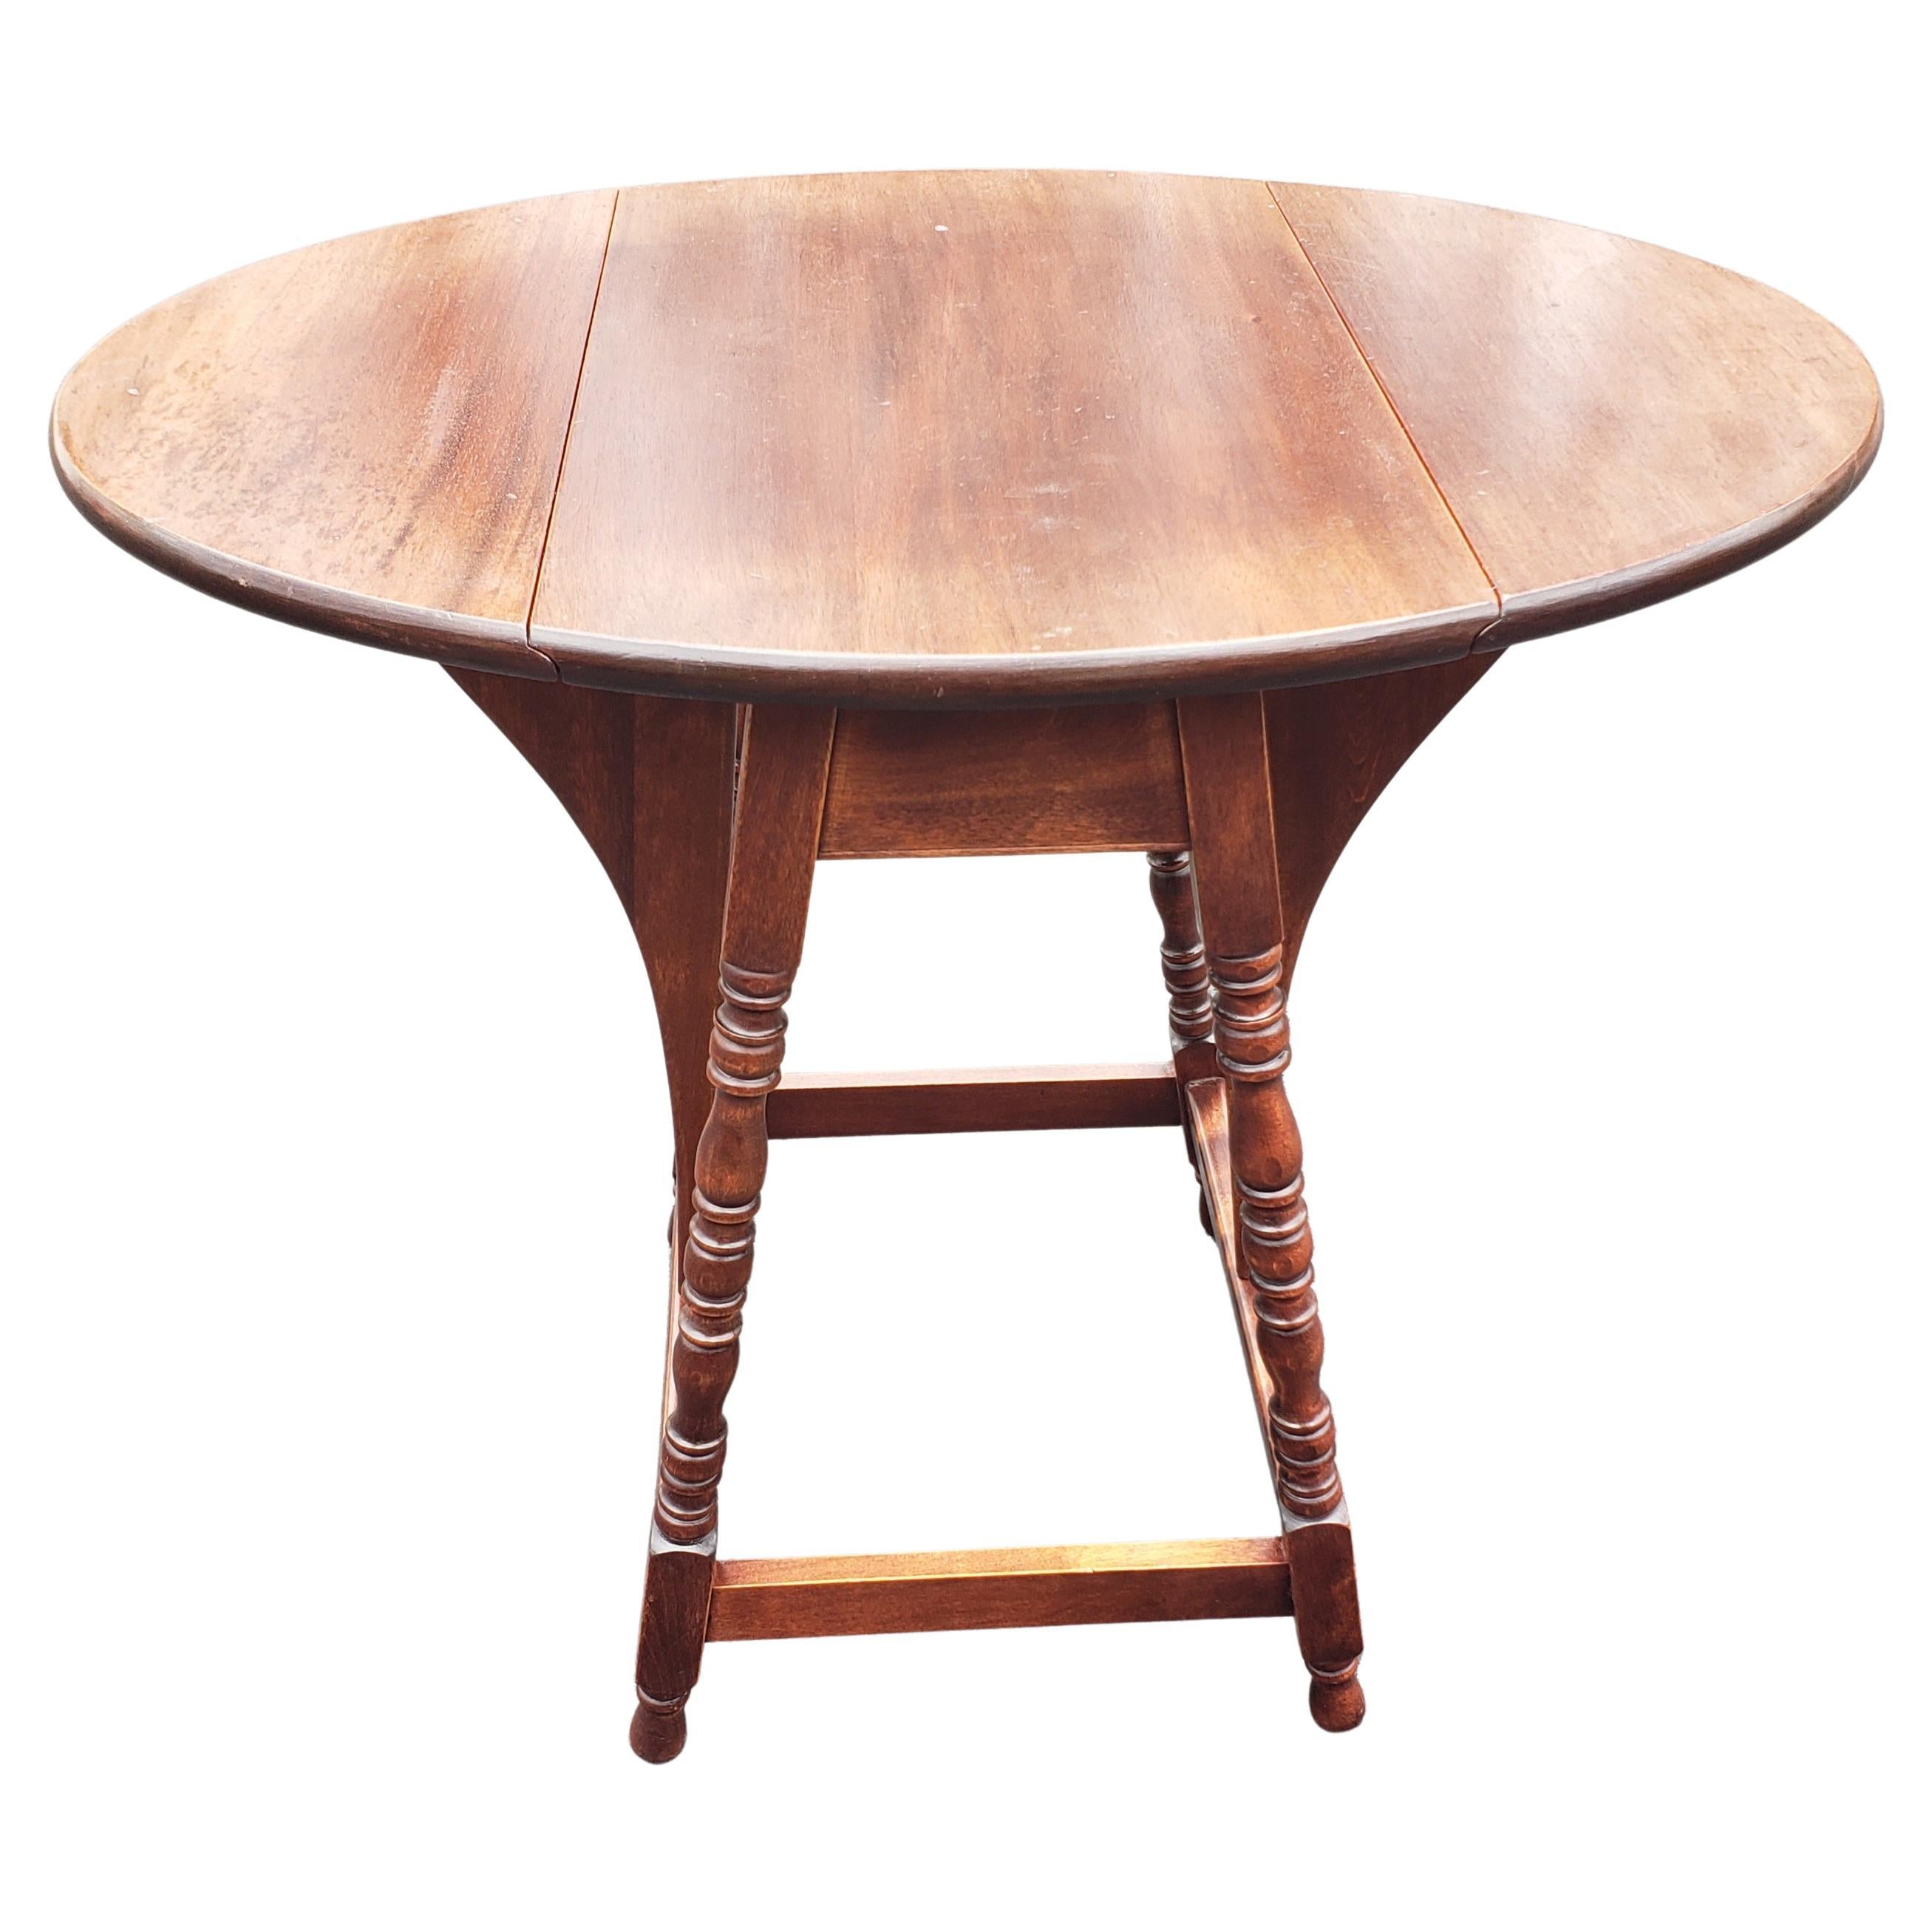 American English Mahogany Oval Drop-Leaf Side Table For Sale